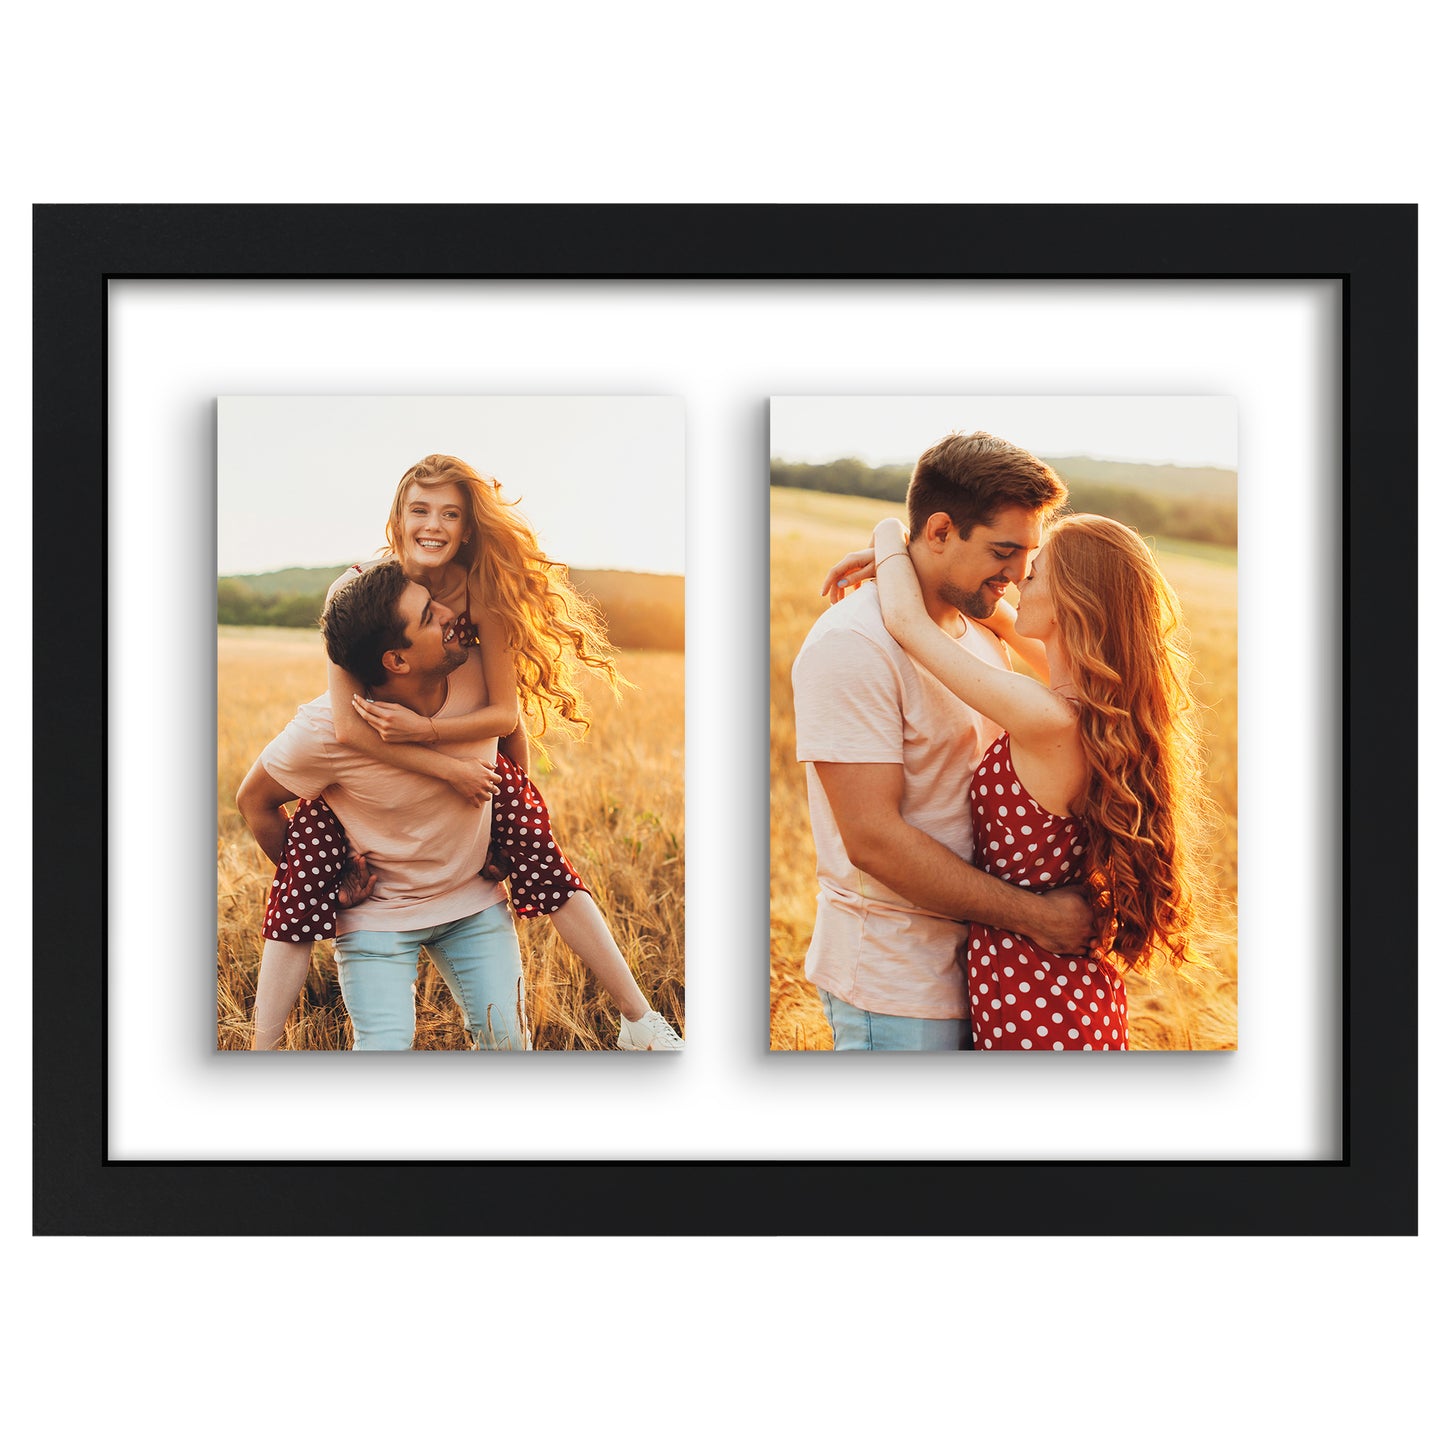 Americanflat Floating Collage Frame - Display Two 4x6 Photos - 9x12